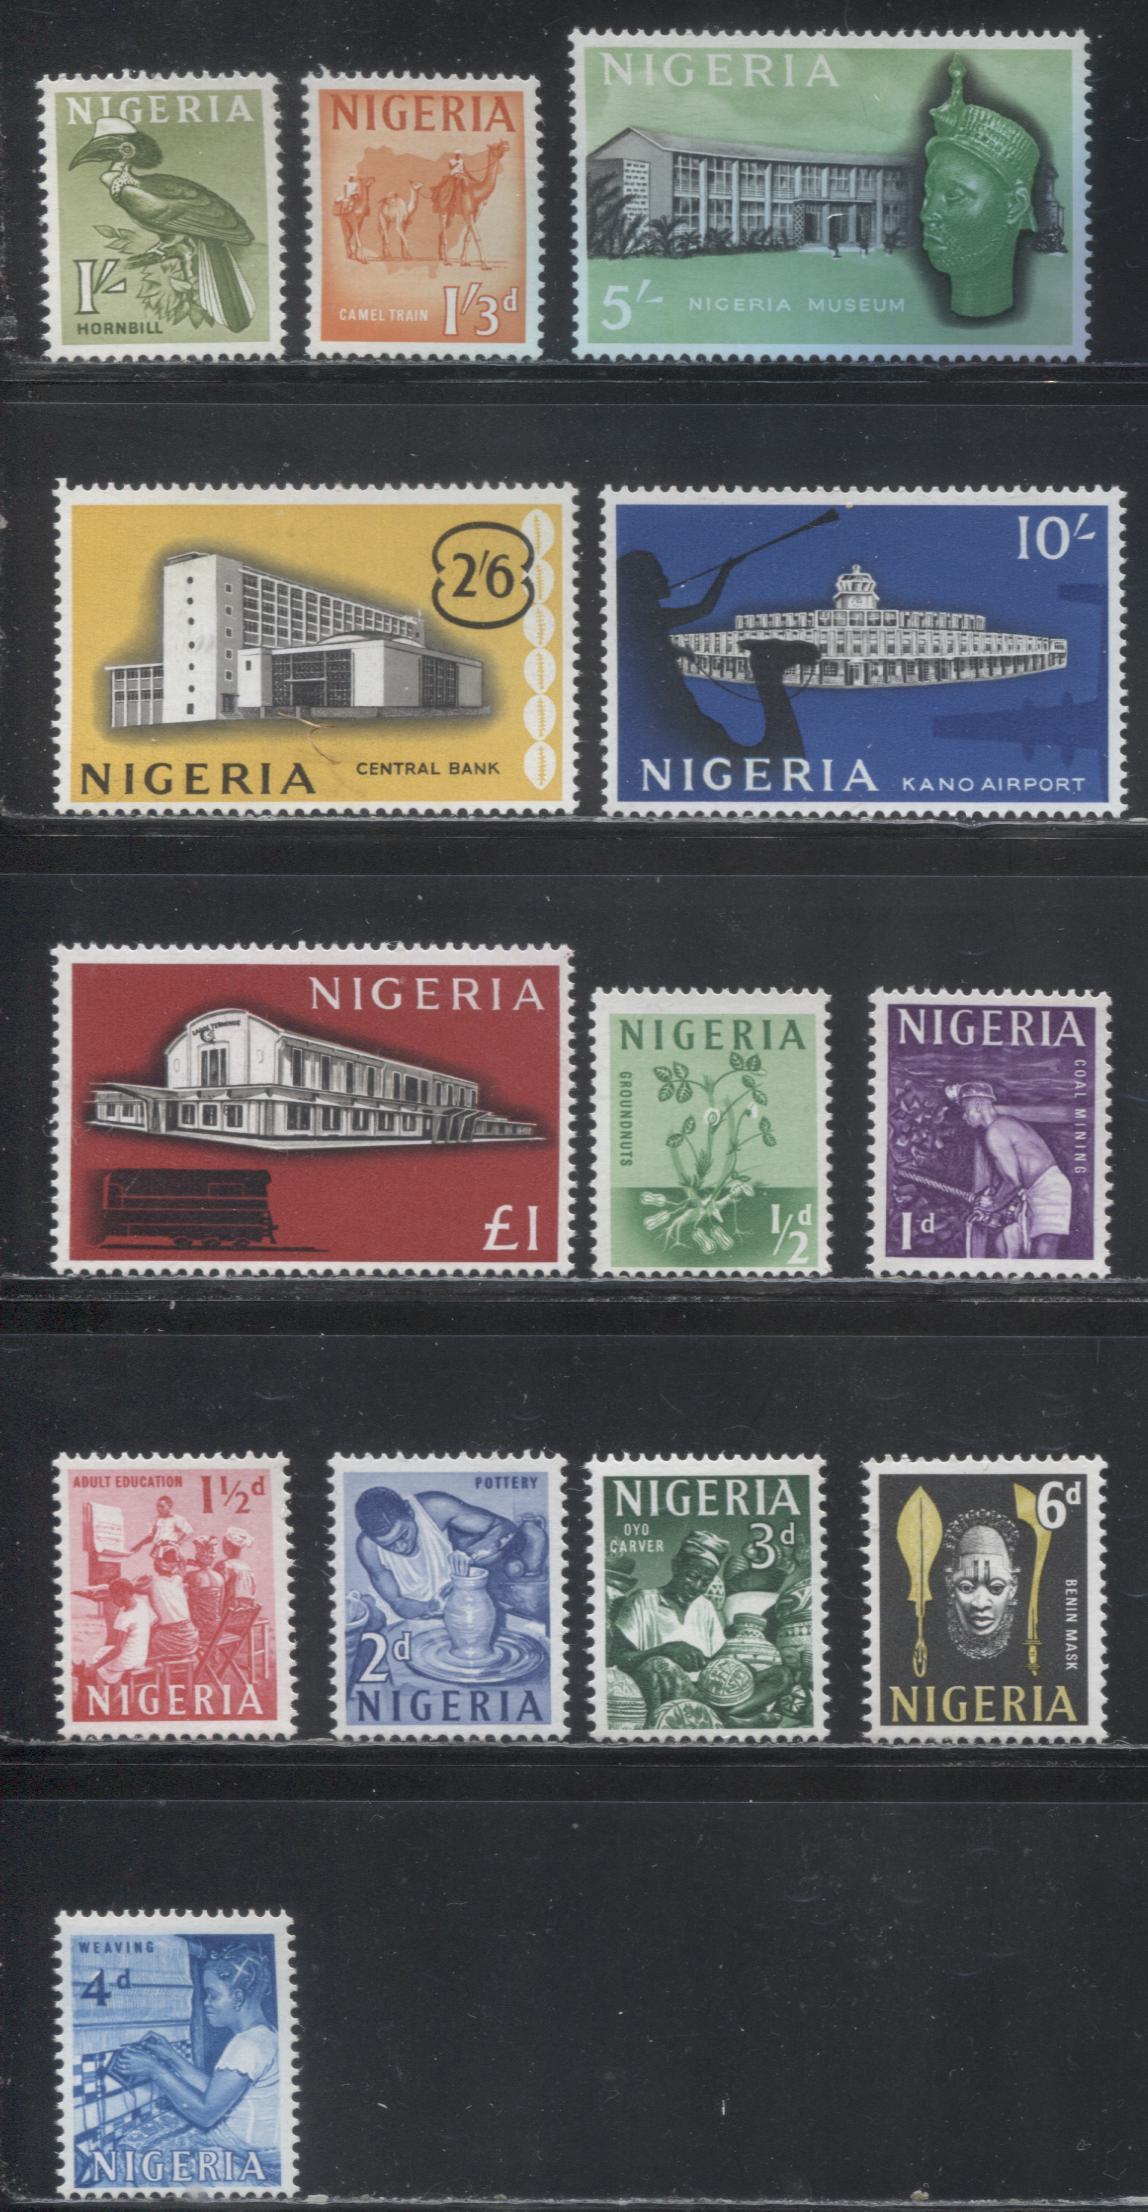 Lot 202A Nigeria SG#89-101 1/2d - 1 Pound, 1961-1965 Harrison Pictorial Definitive Issue, a Mostly VFNH Set on DF Paper